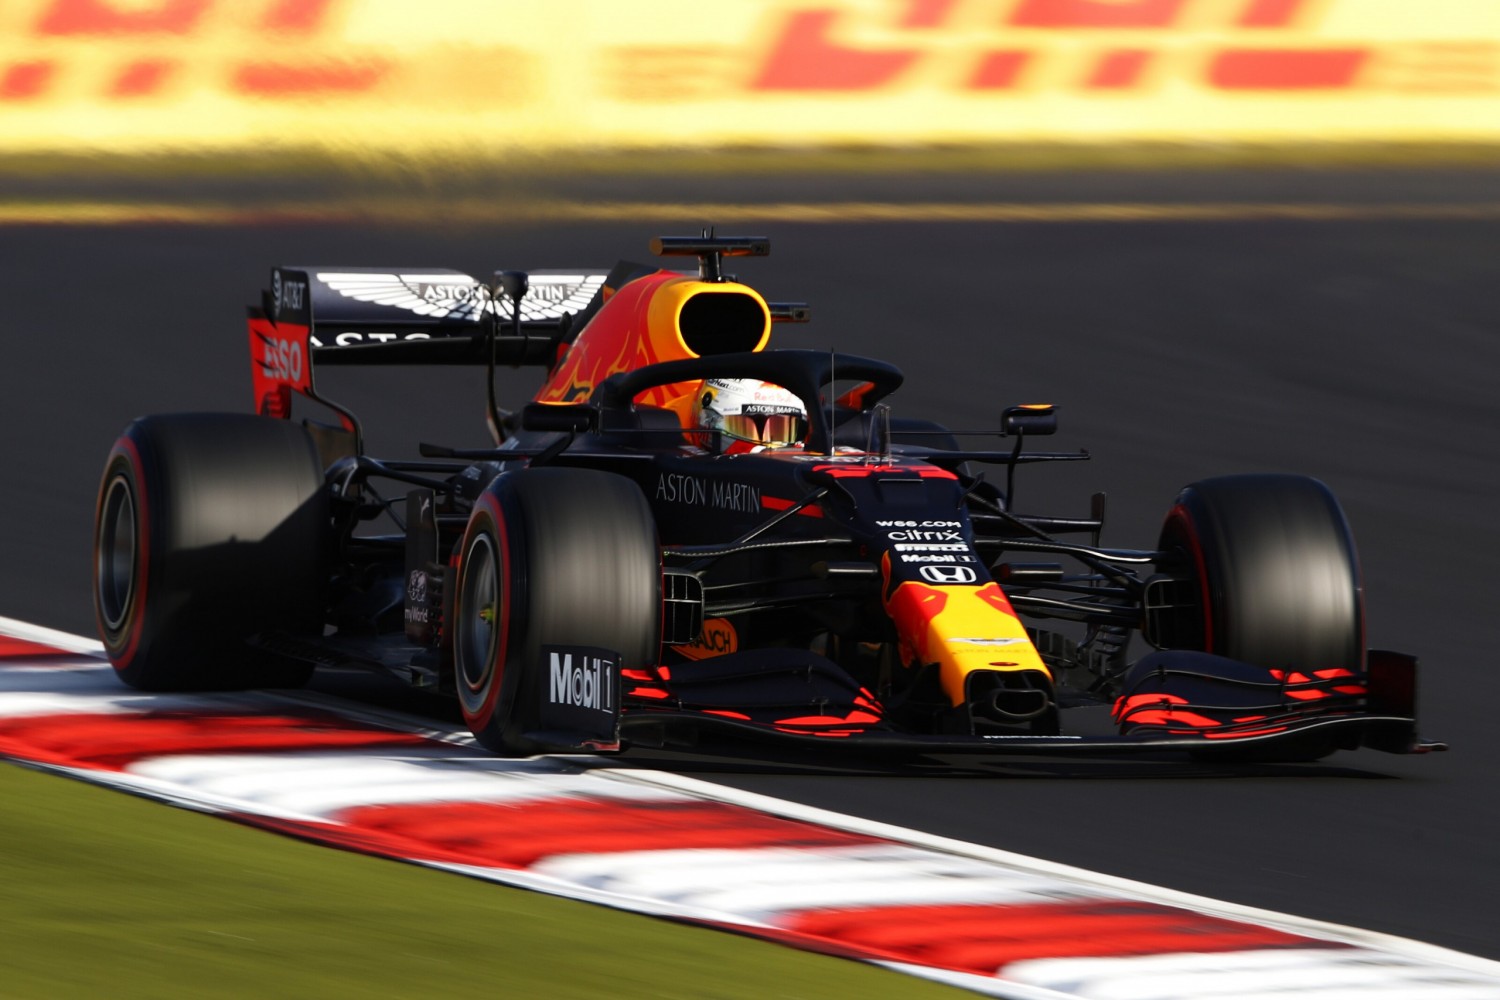 lave mad illoyalitet Variant Red Bull knowledge of RB16 to benefit 2021 'B-spec' car